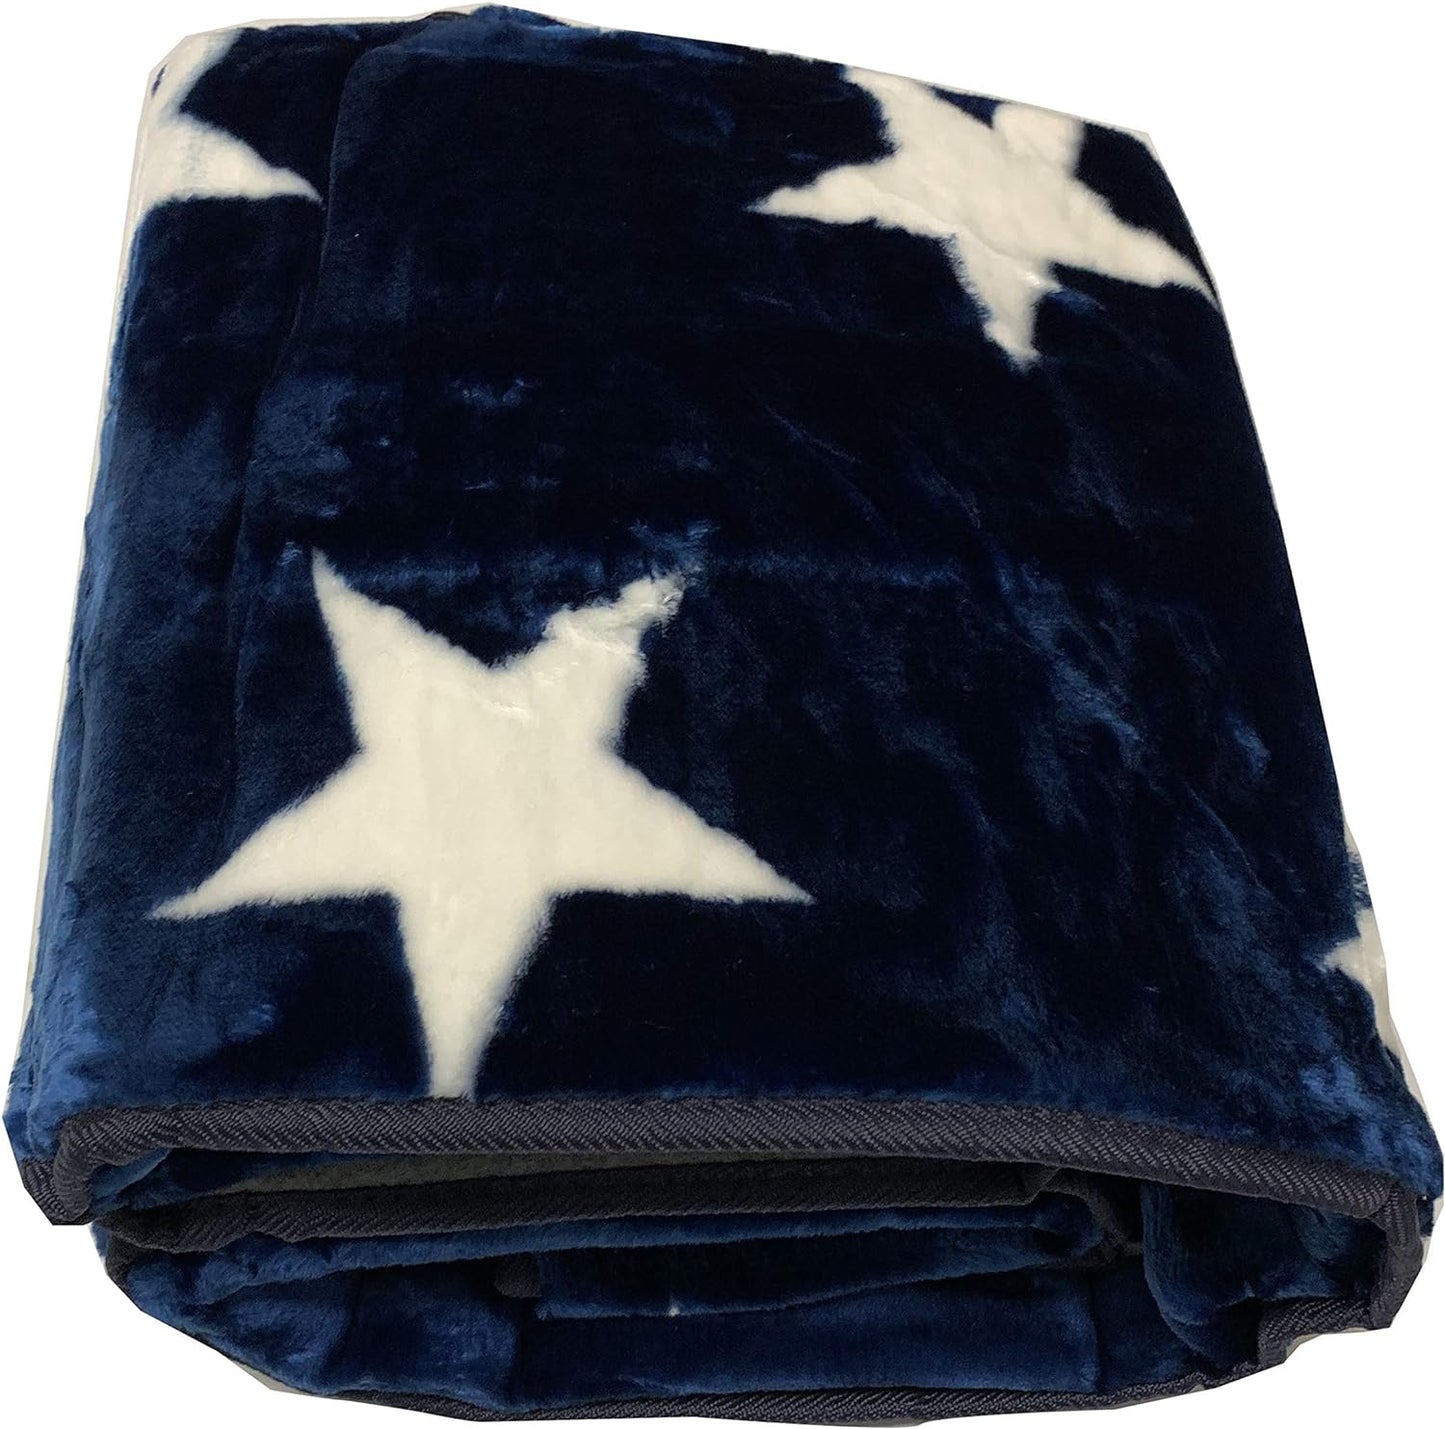 Blanket Area Rug Collection Stars Design Area Rug Rugs Fabric Backing (Navy Blue, 6 x 6 (6'1' x 6'1")